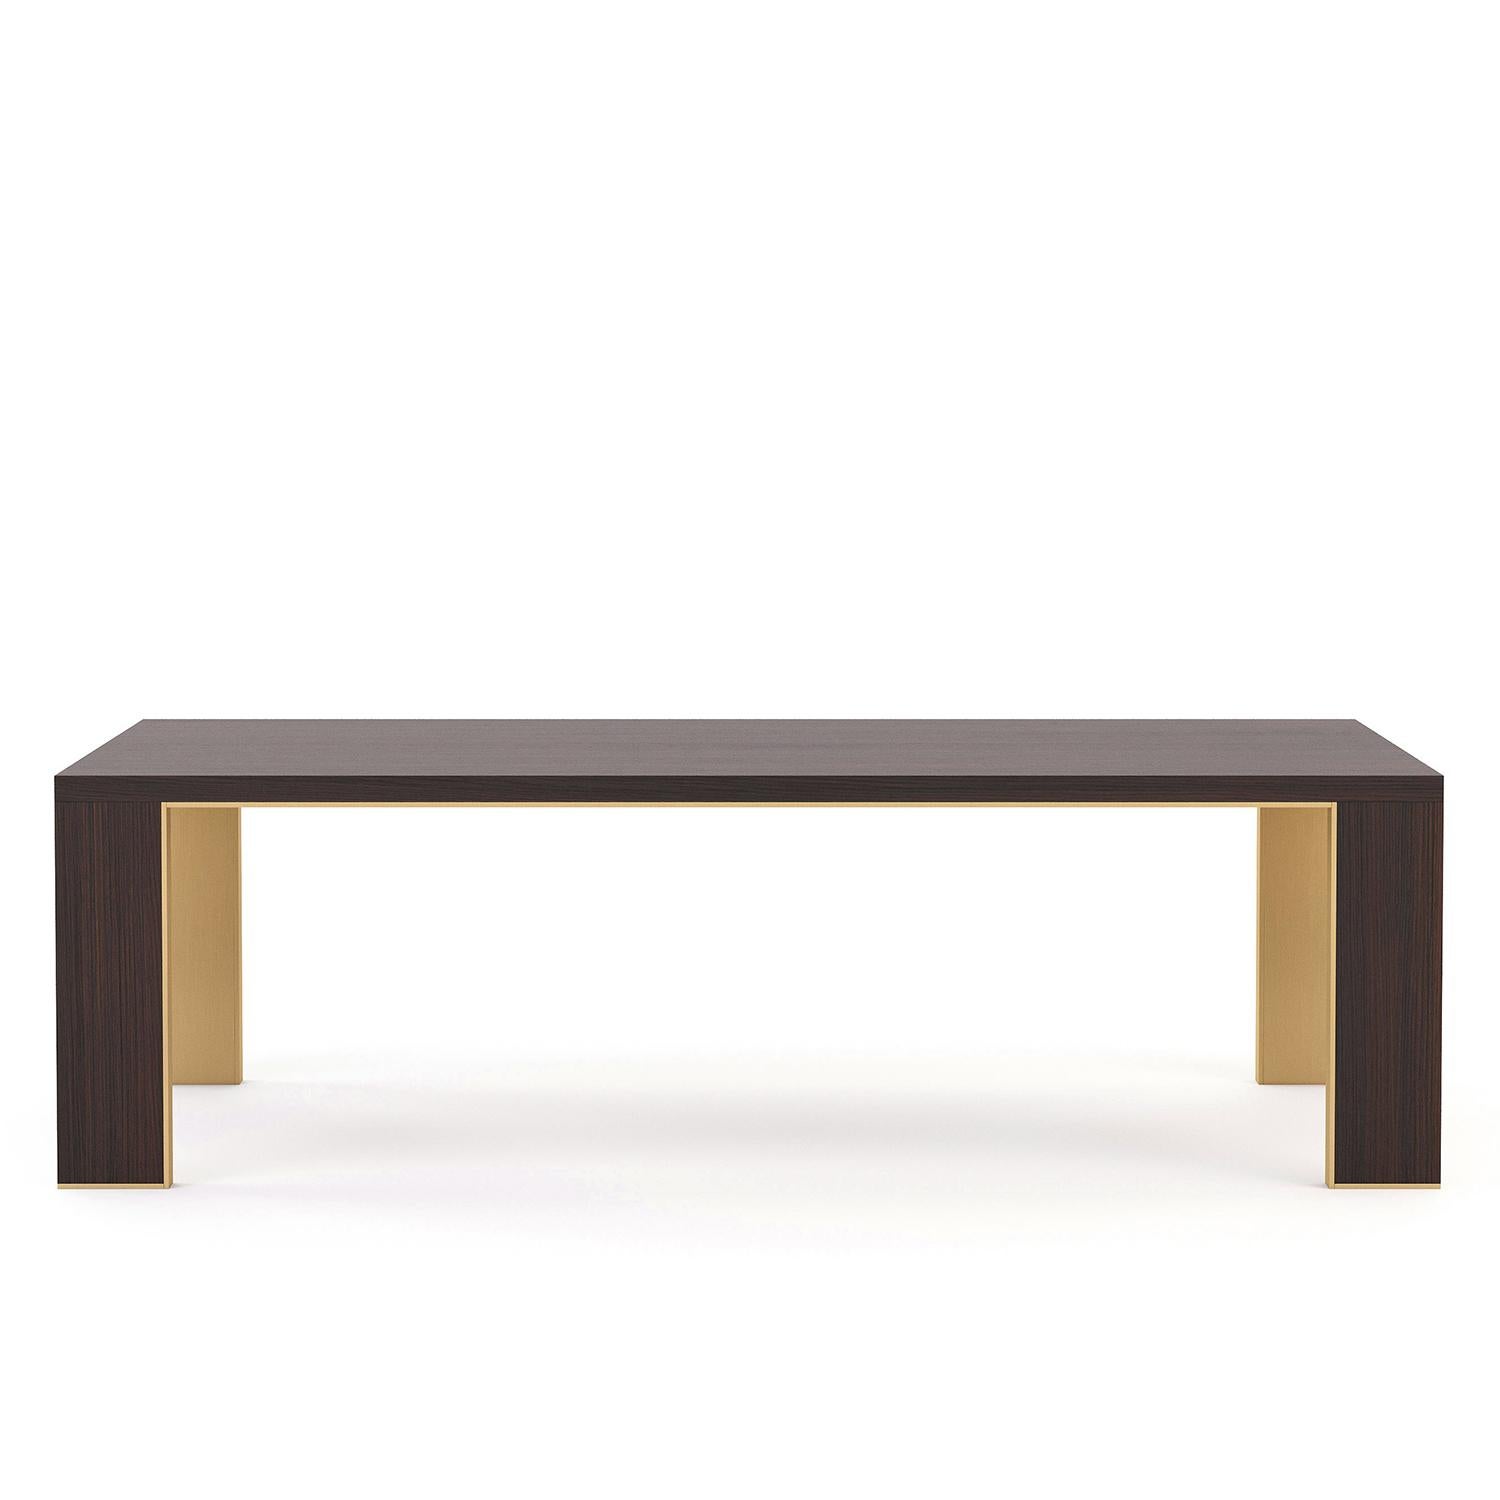 Dining Table Izia with structure in stainless steel in matt gold finish,
with eucalyptus wood veneer in smocked matt finish.
Also available on request in L200xD120xH78cm, price: 16900,00€
Also available in ebony matte finish, or grey oak matte